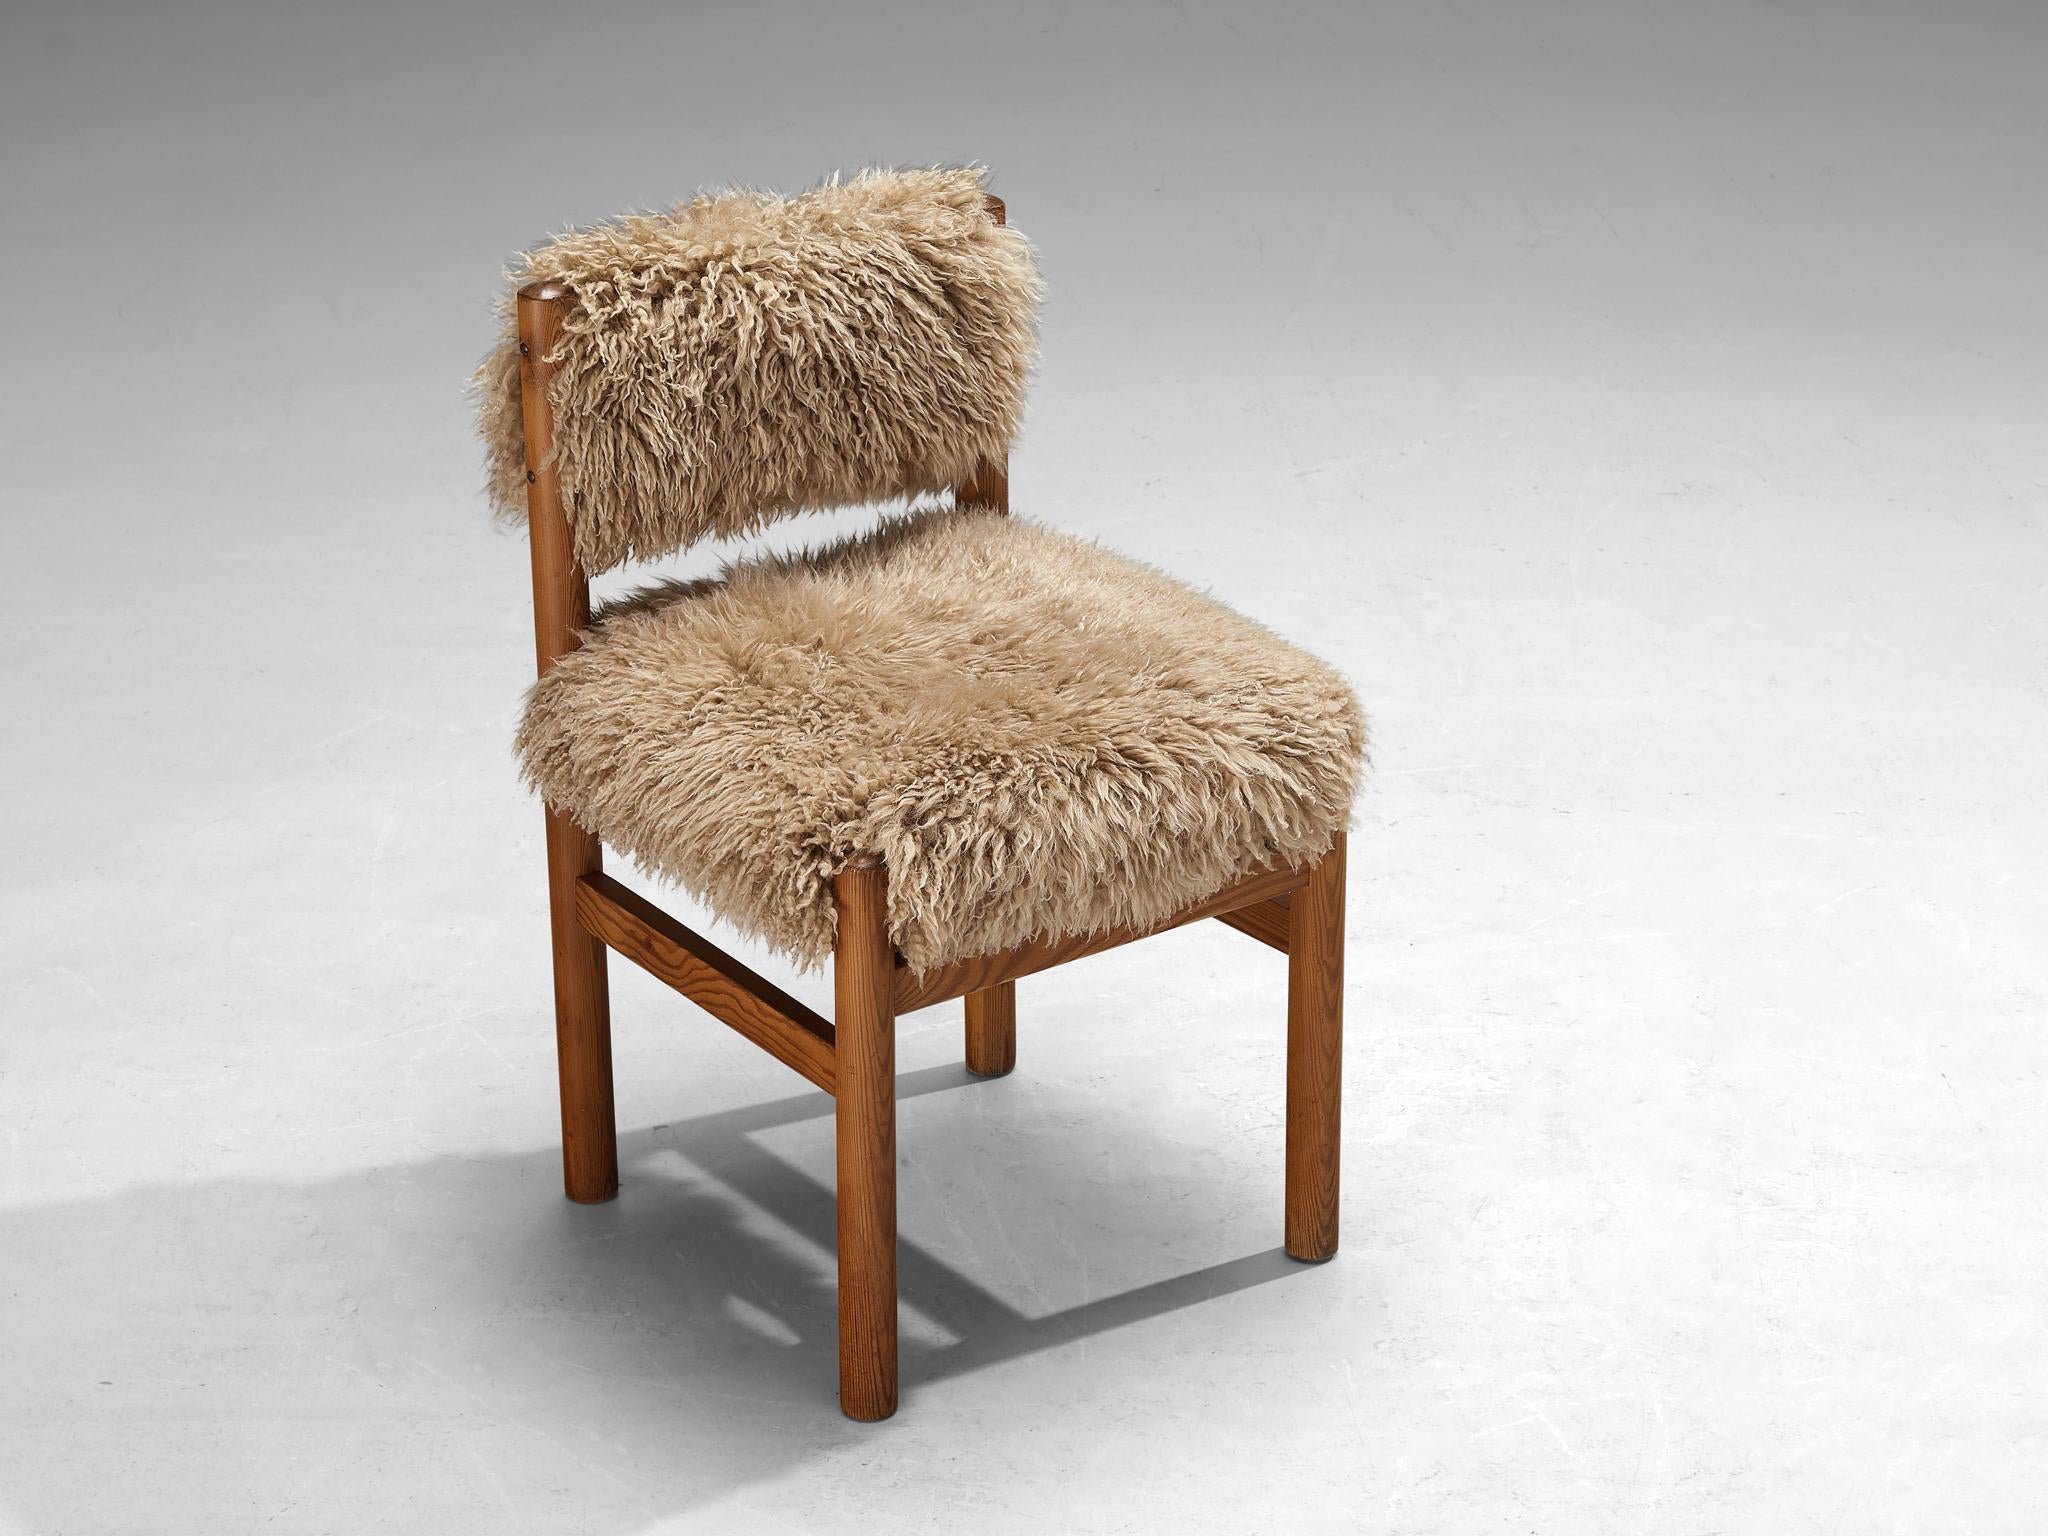 Pair of Dining Chairs in Pine and Sheepskin